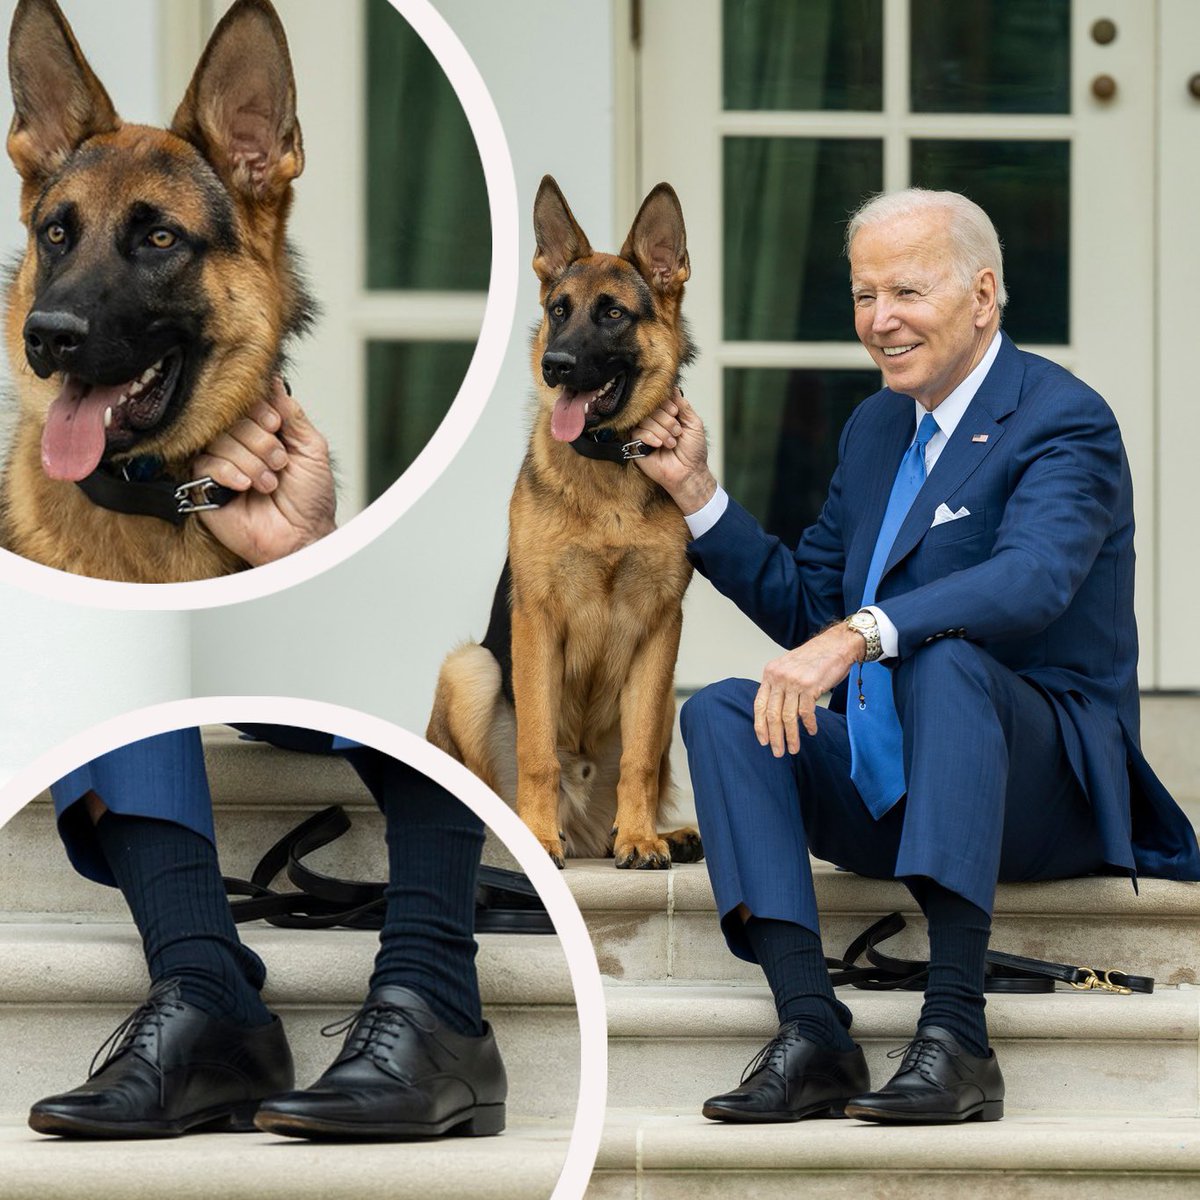 The President and “Commander” Biden taking a breather. On the C in C’s wrist is his trusty Seiko quartz chrono ref. 7T32-6M90. Not a pick you see everyday 

#presidentbiden #watches #seiko #seiko7t32 #quartzwatches #chronograph #joebiden #commanderbiden #doggos #doggies